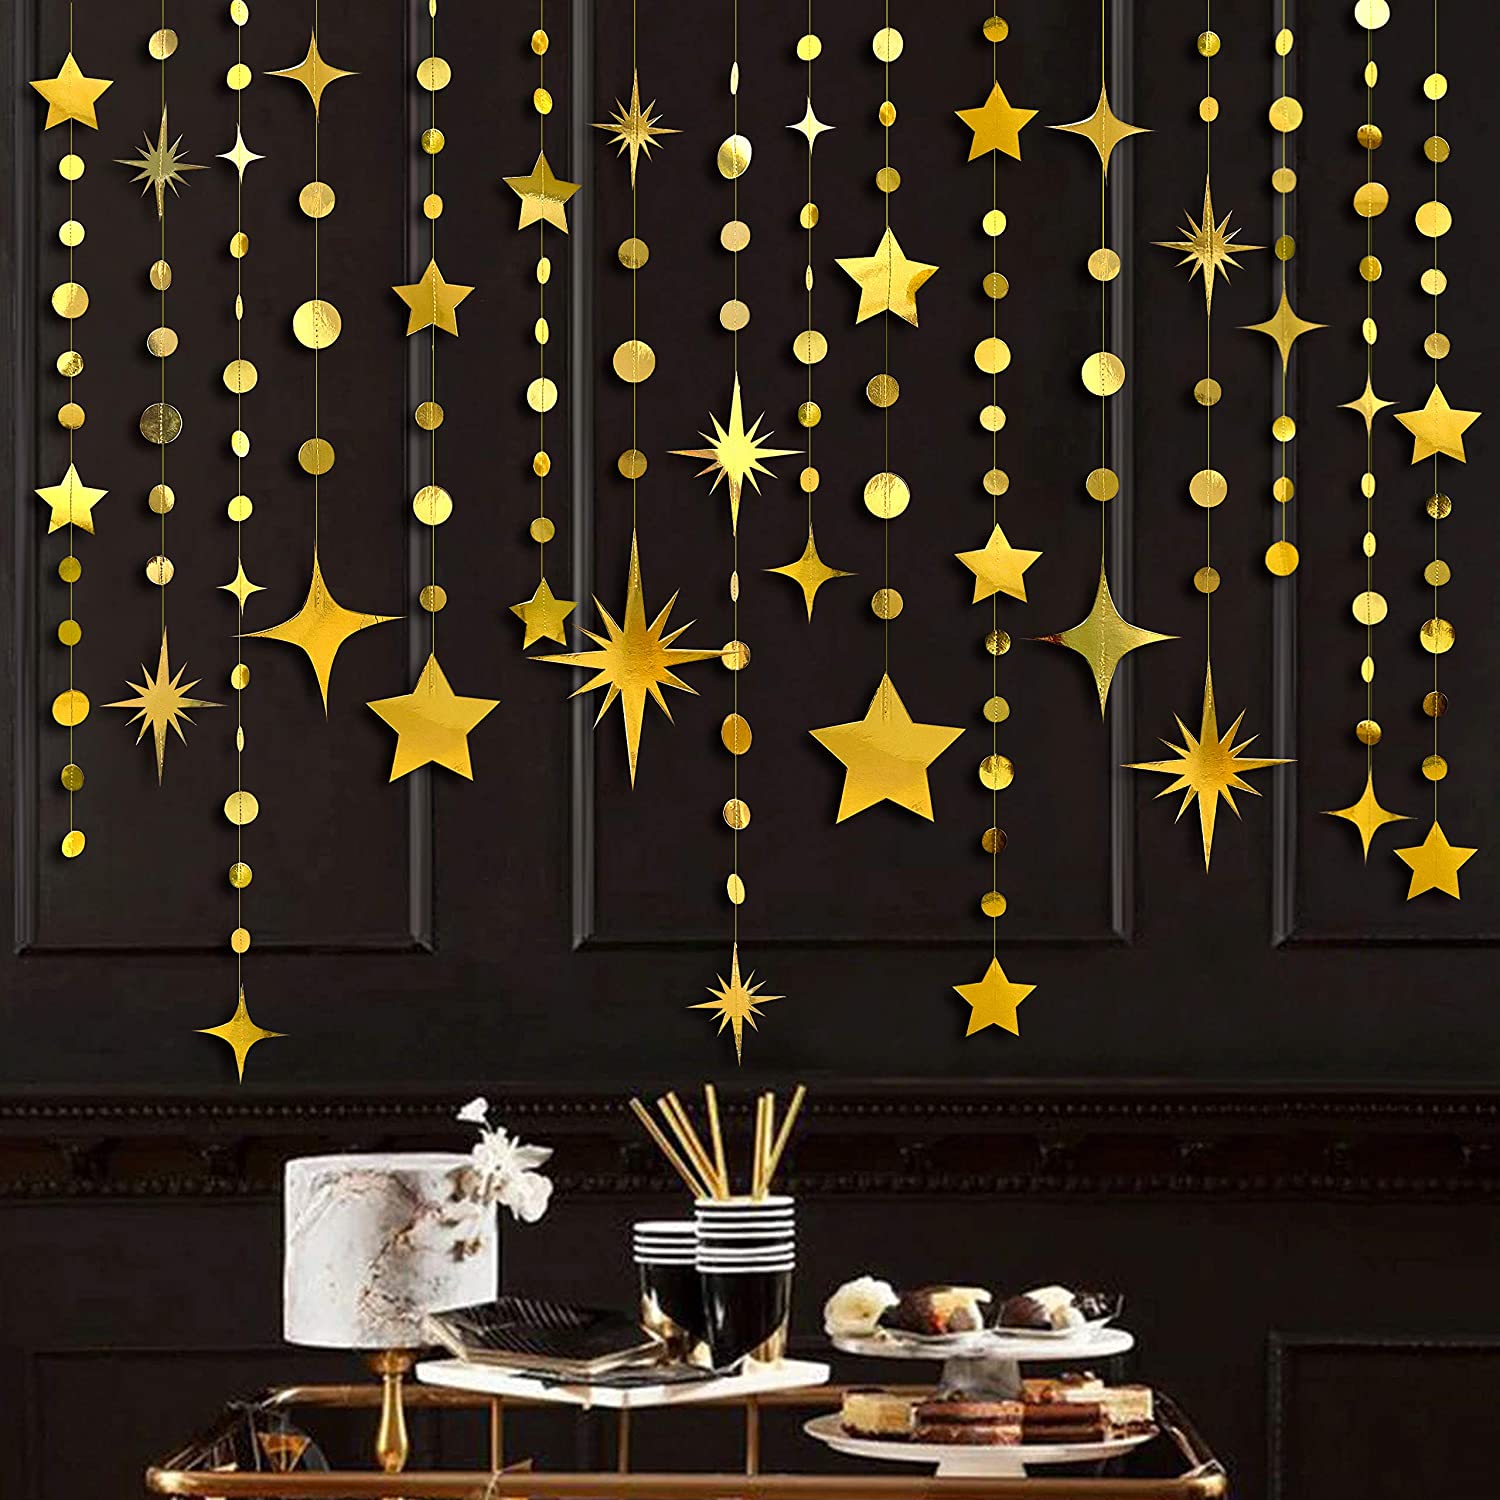 4 Pack Twinkle Gold Star Garland Glitter Paper Circle Dots StreamerHanging Star Banner Party Decorations for Birthday Wedding Supplies Home Decor 